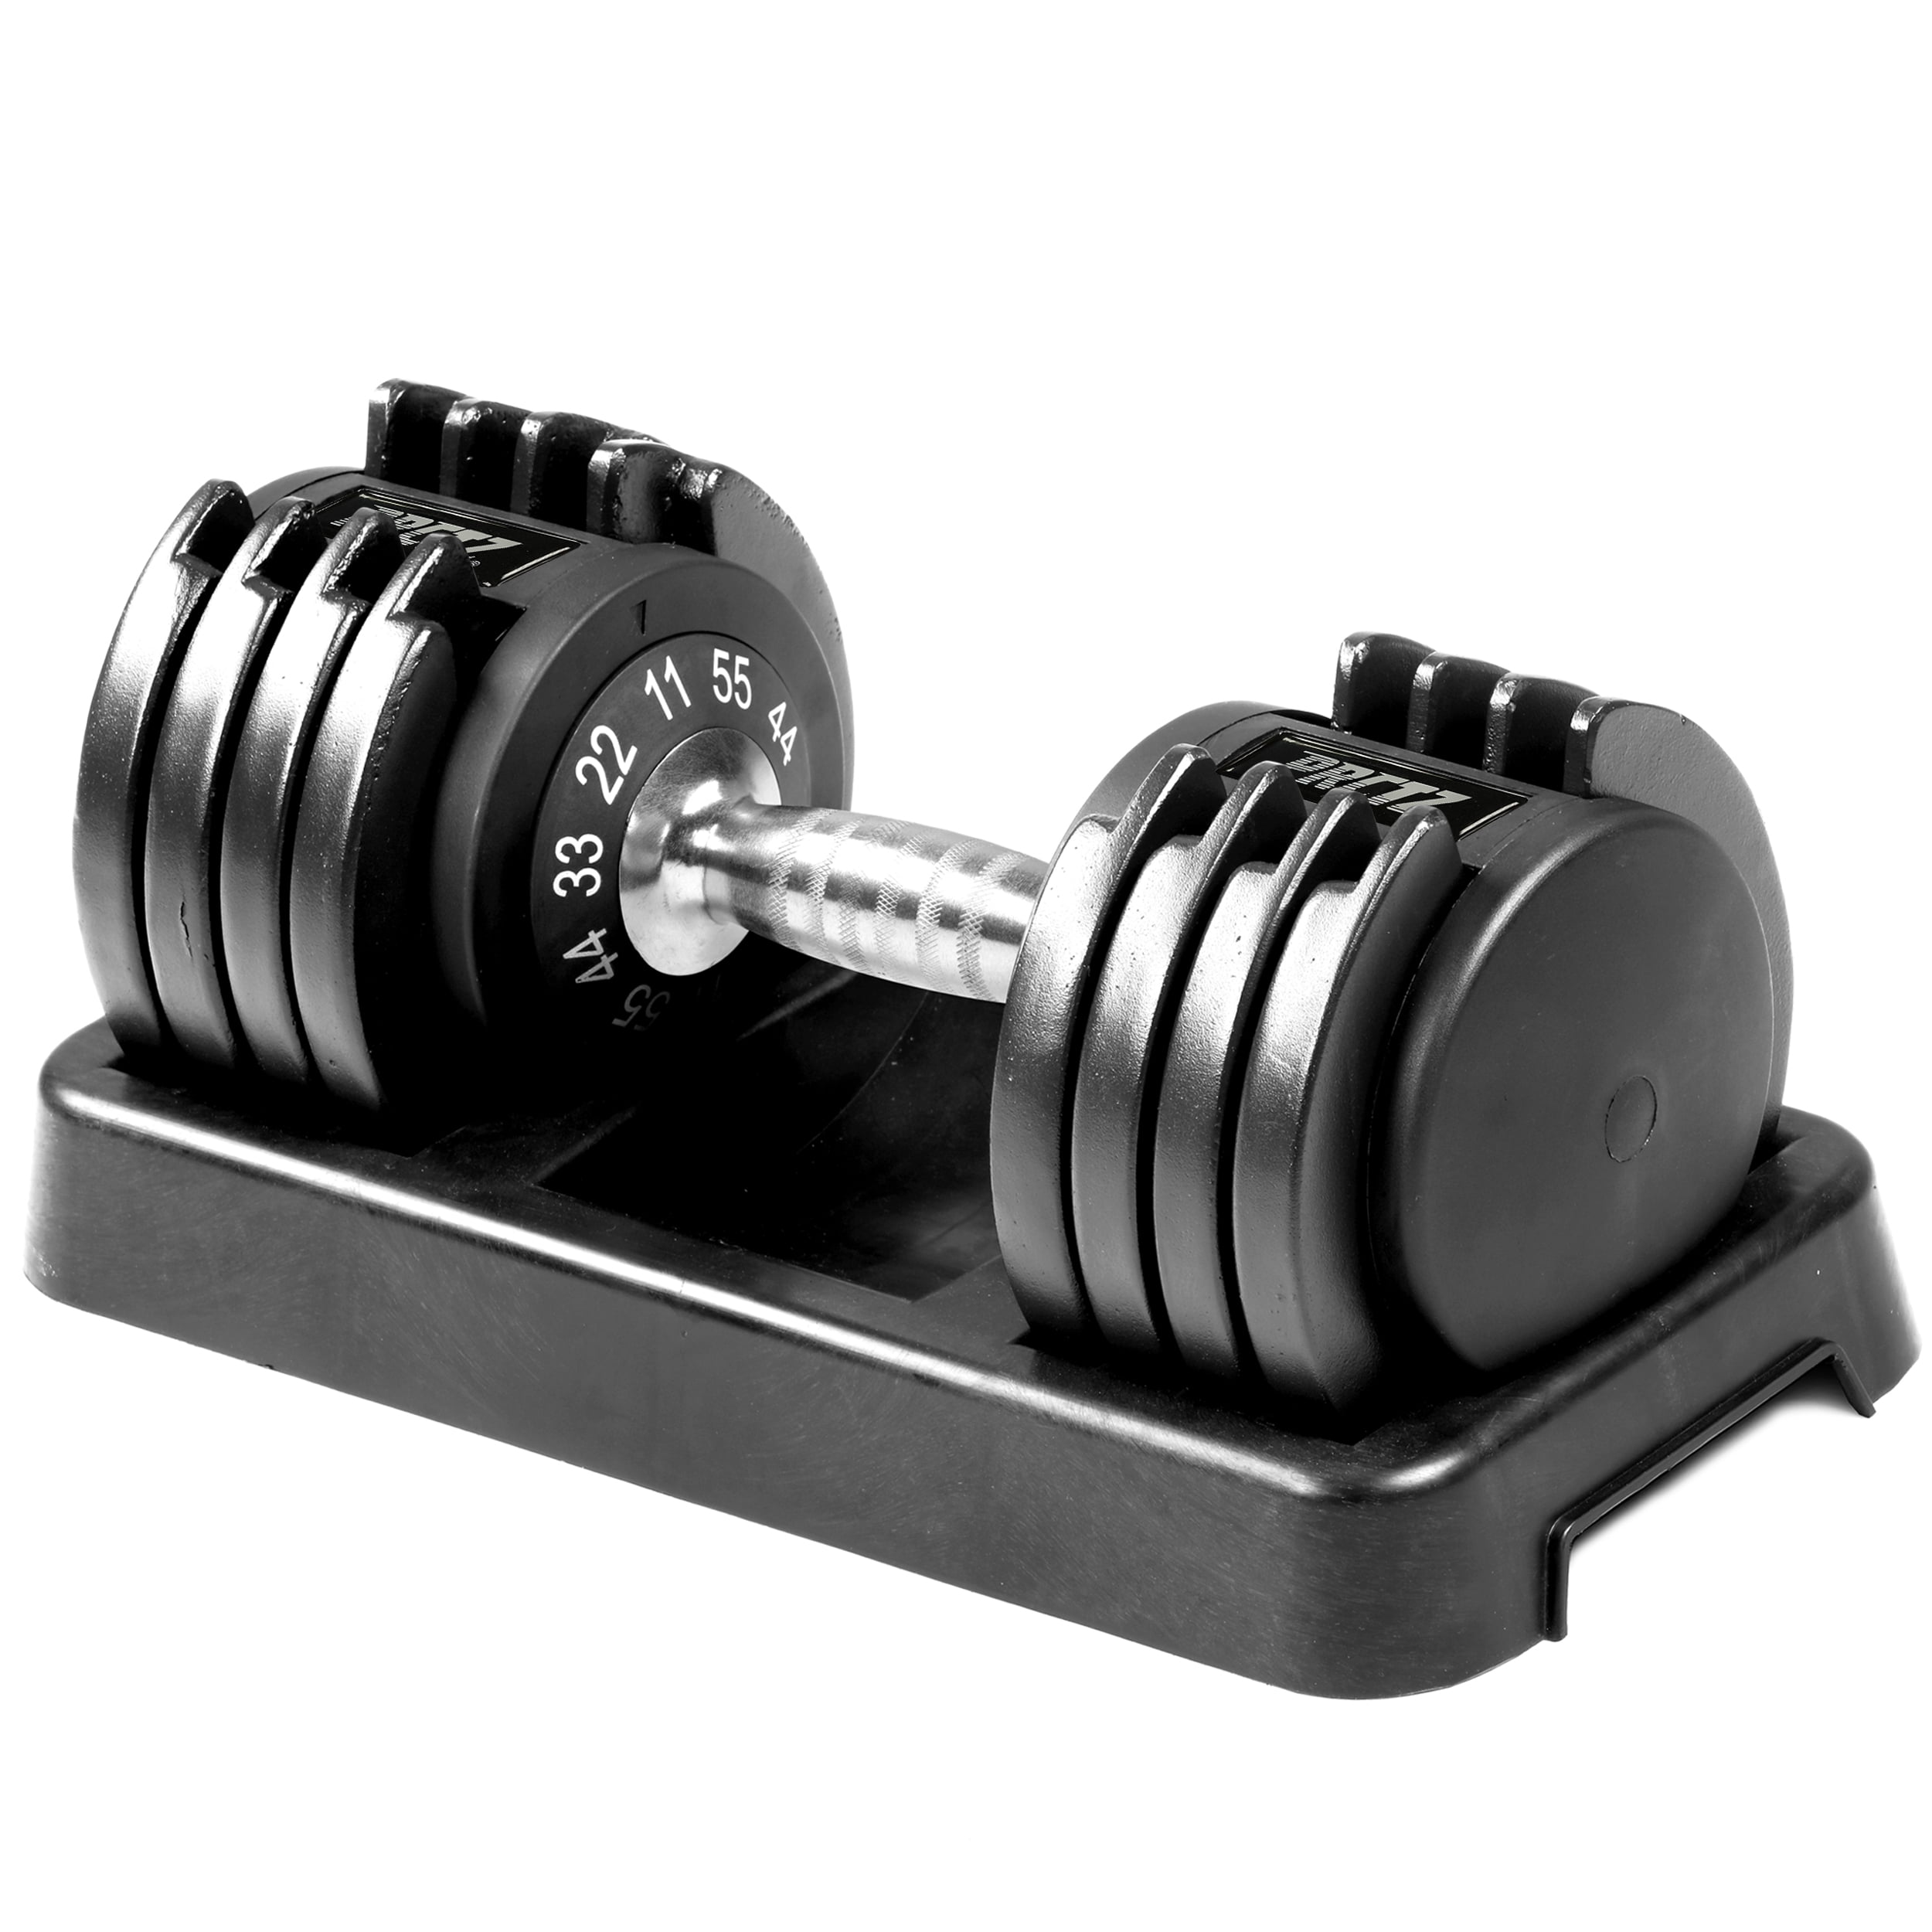 Single 12 kgs 25 lbs PRCTZ Adjustable Dumbbell Adjustments 5 to 25 Lbs New 